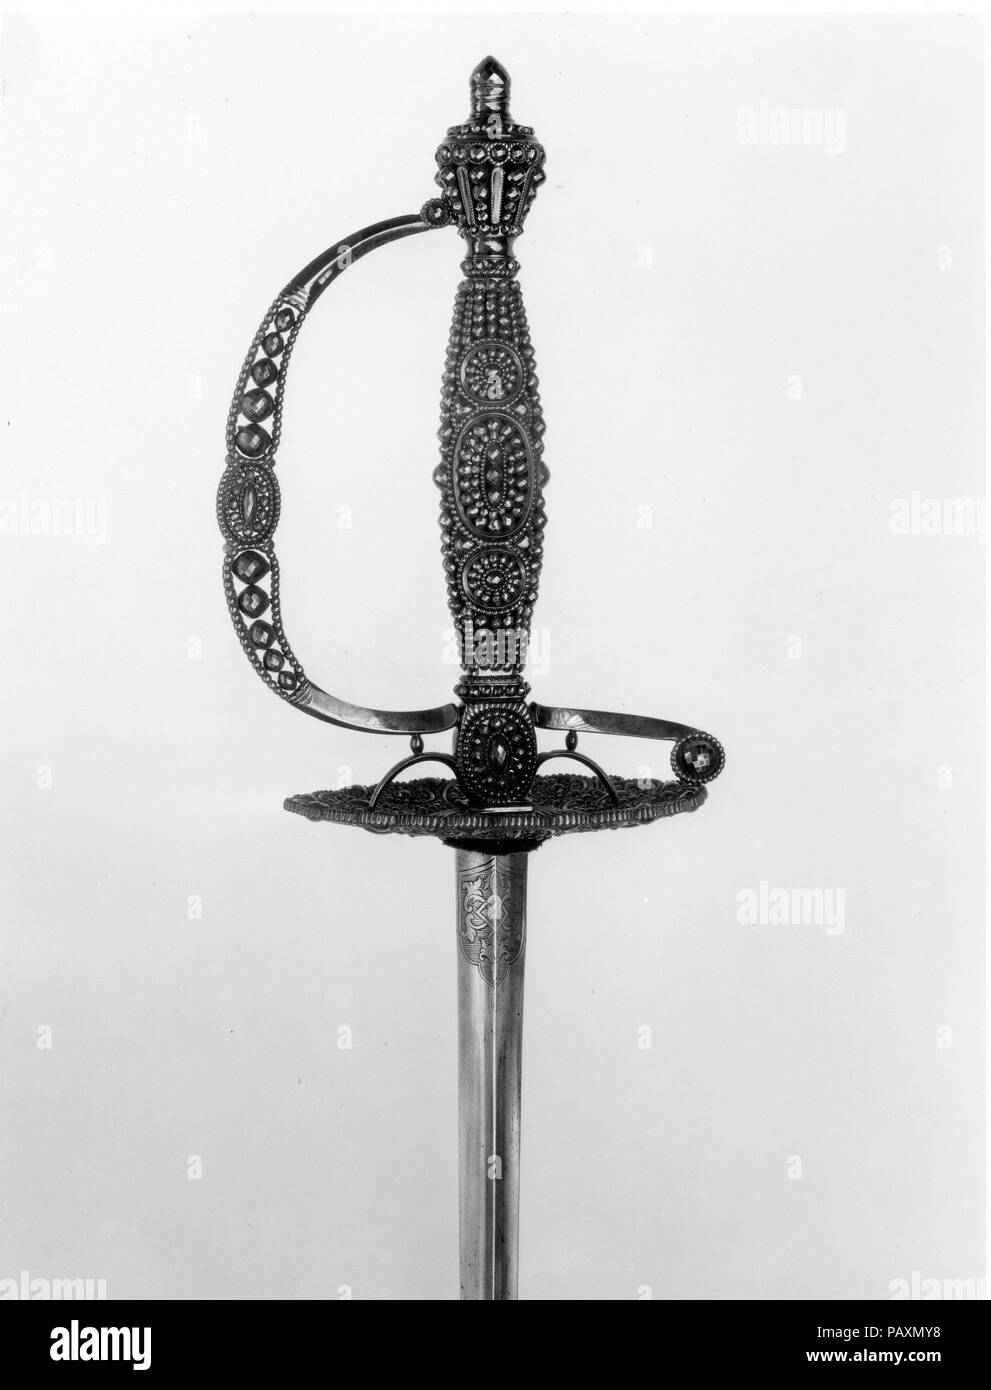 Smallsword, known as a Mourning Sword. Culture: British. Dimensions: L. 38 in. (96.5 cm); L. of blade 30 3/4 in. (78.1 cm); W. 4 3/4 in. (12.1 cm); D. 3 1/2 in. (8.9 cm); Wt. 15 oz. (425 g). Date: ca. 1790.  The deeply blued steel hilt is set with faceted steel beads, giving the impression of jewels. Beaded steel smallsword hilts, blued to nearly jet black, were in fashion in England during the Neoclassical period and are thought to have been worn with formal dress at times of mourning. Museum: Metropolitan Museum of Art, New York, USA. Stock Photo